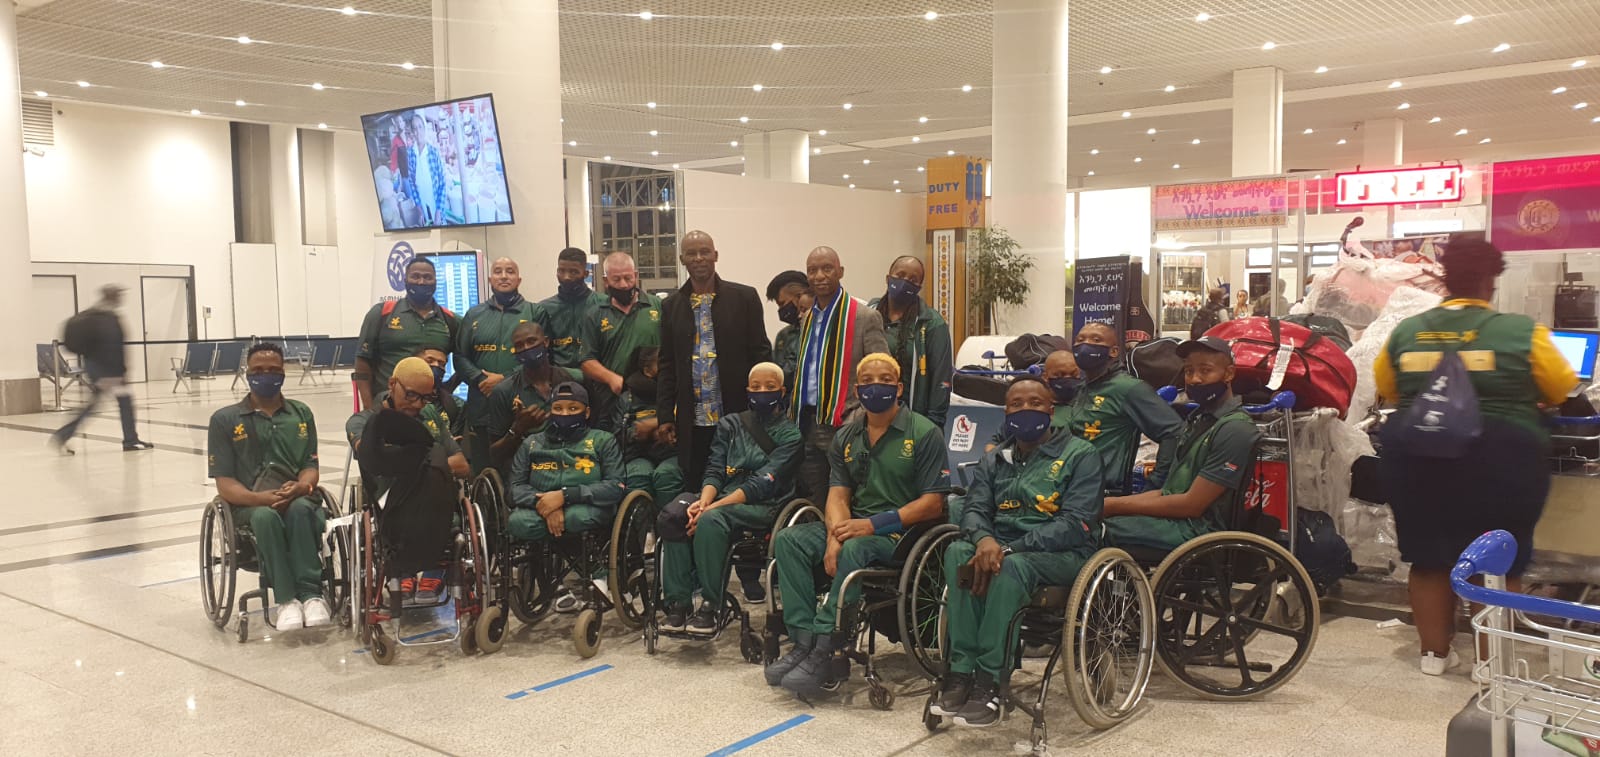 H.E. Ambassador Makaya addressing South Africa’s wheelchair basketball team who are competing against various African countries, on 25 January 2022